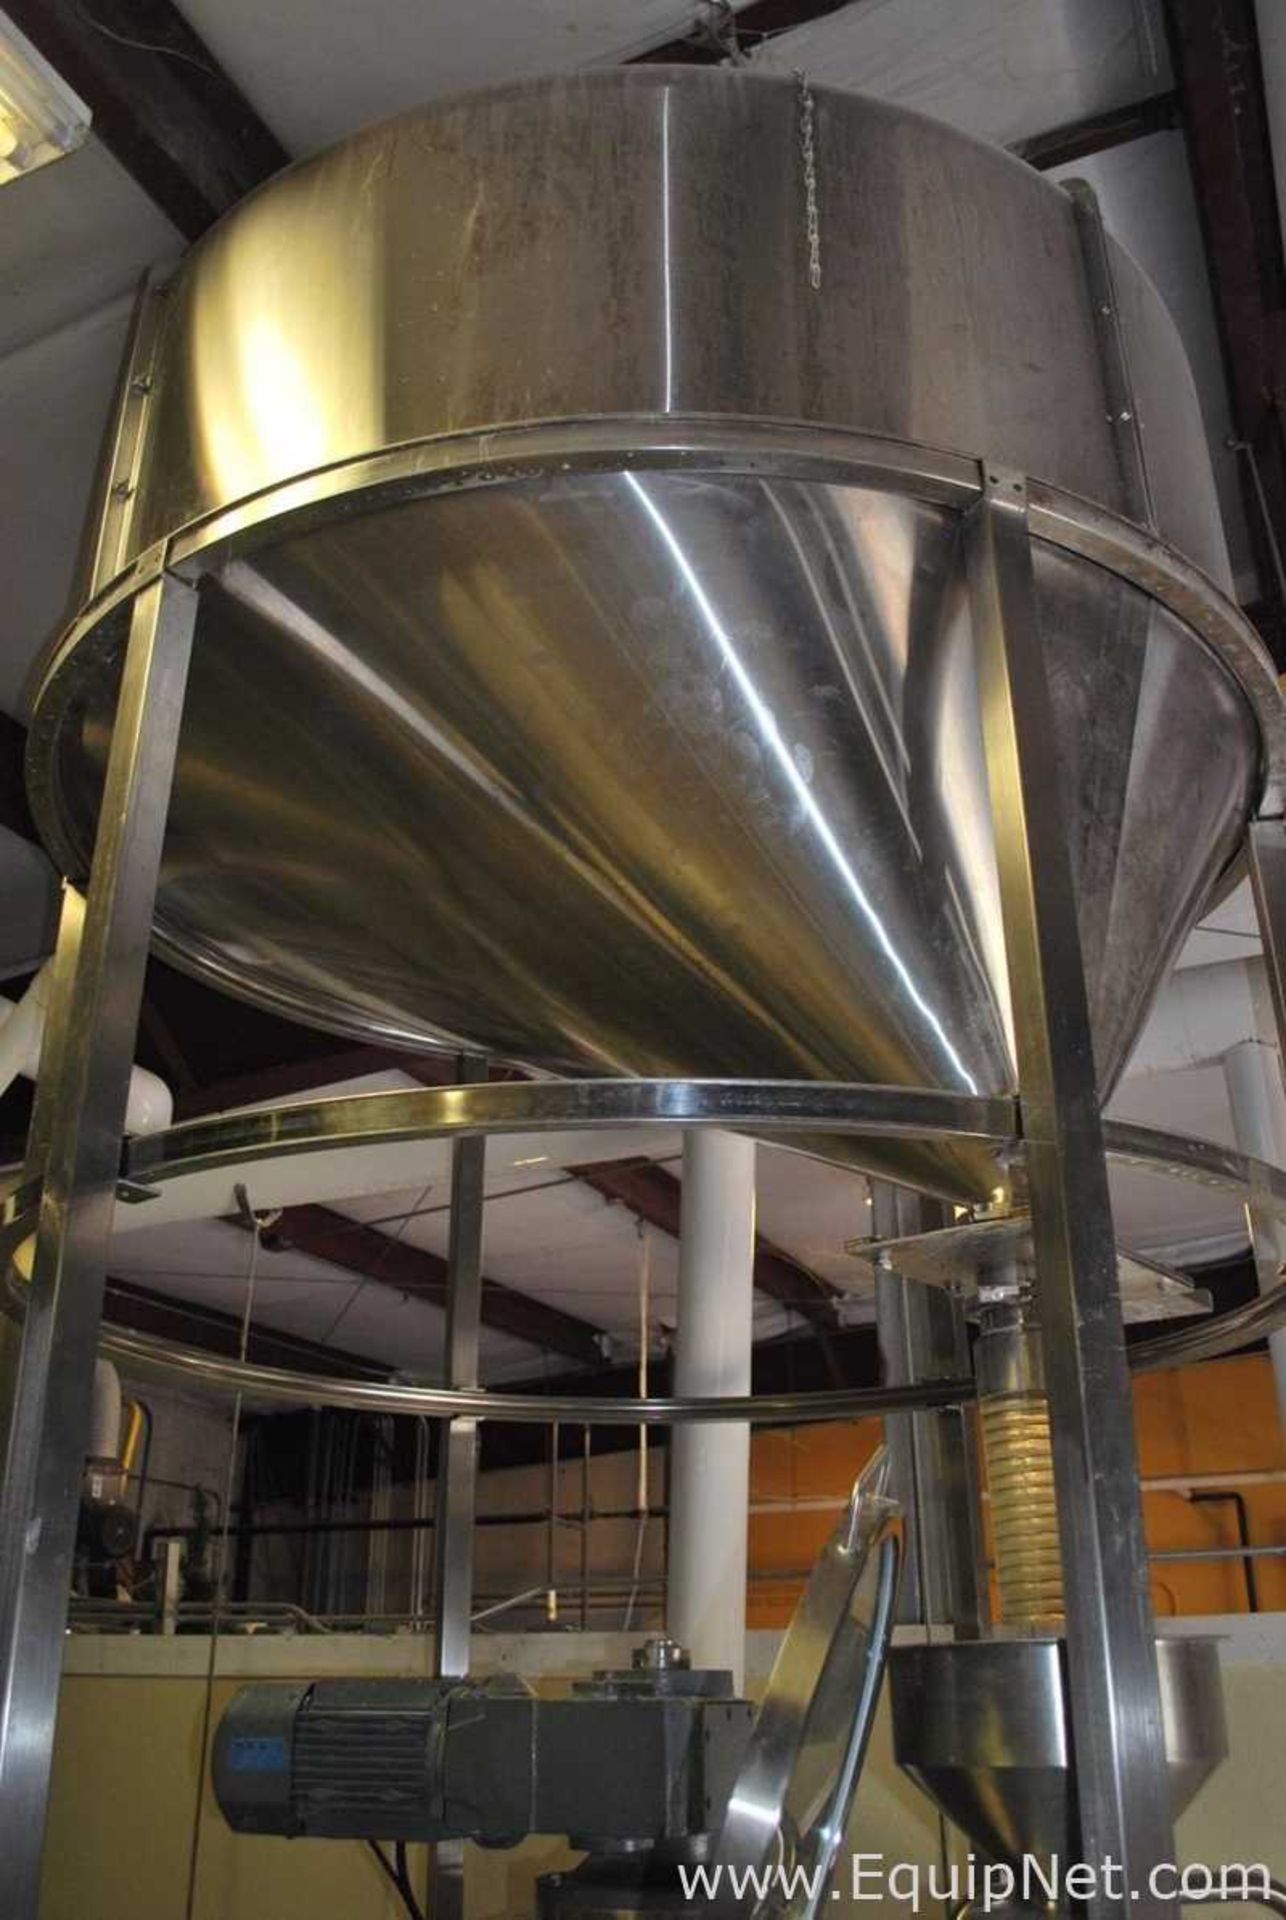 Brew House Sytem with Three- 20 BBL Vessels Mash Tun|Lauter Tun|Whirlpool-Boil Kettle - Image 7 of 10